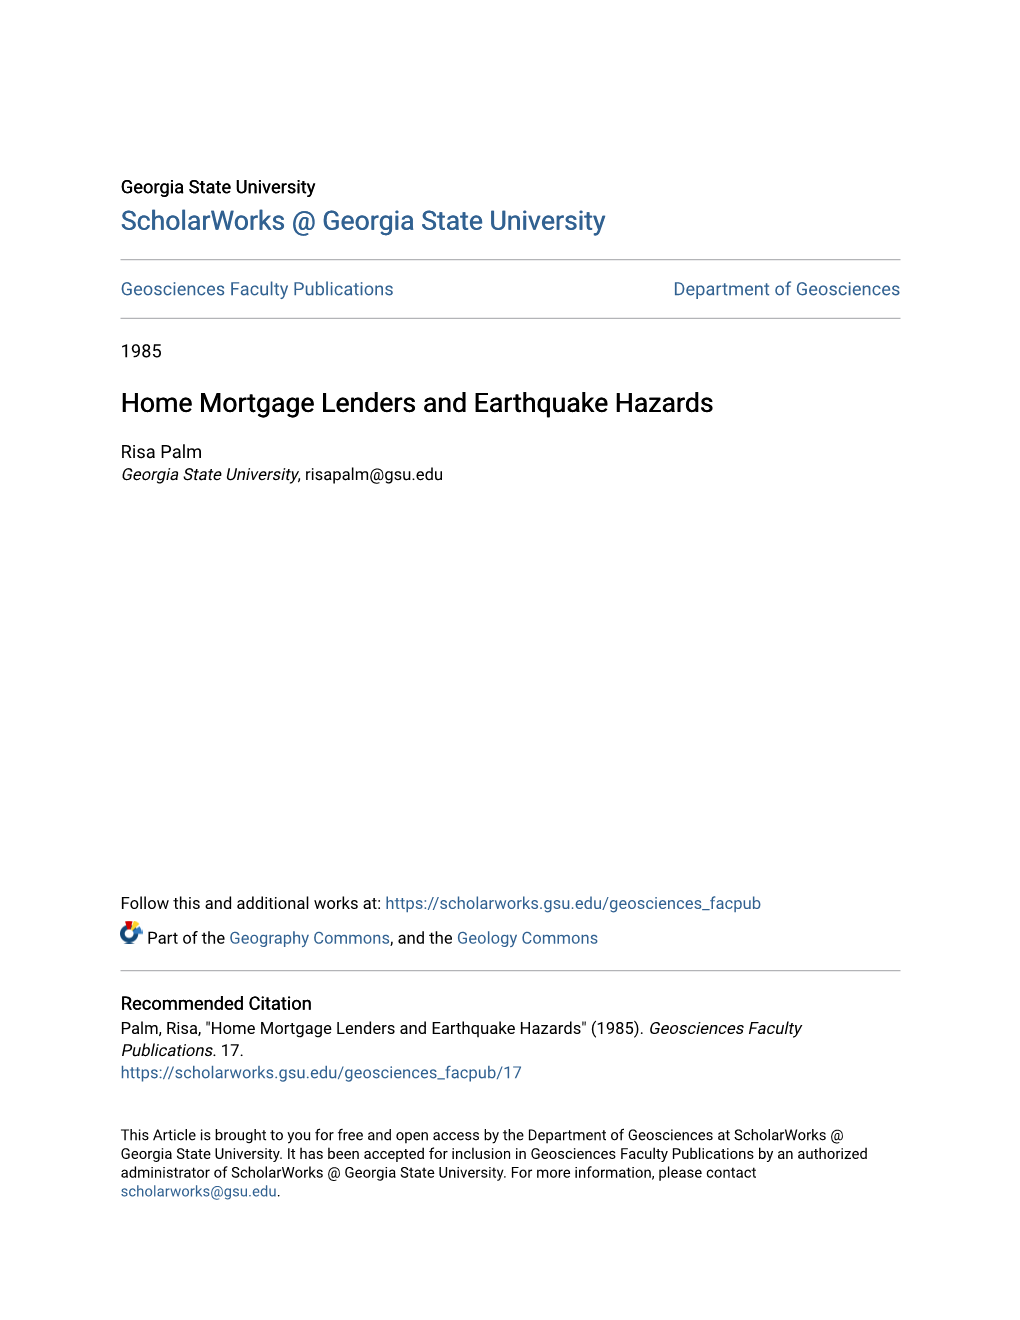 Home Mortgage Lenders and Earthquake Hazards